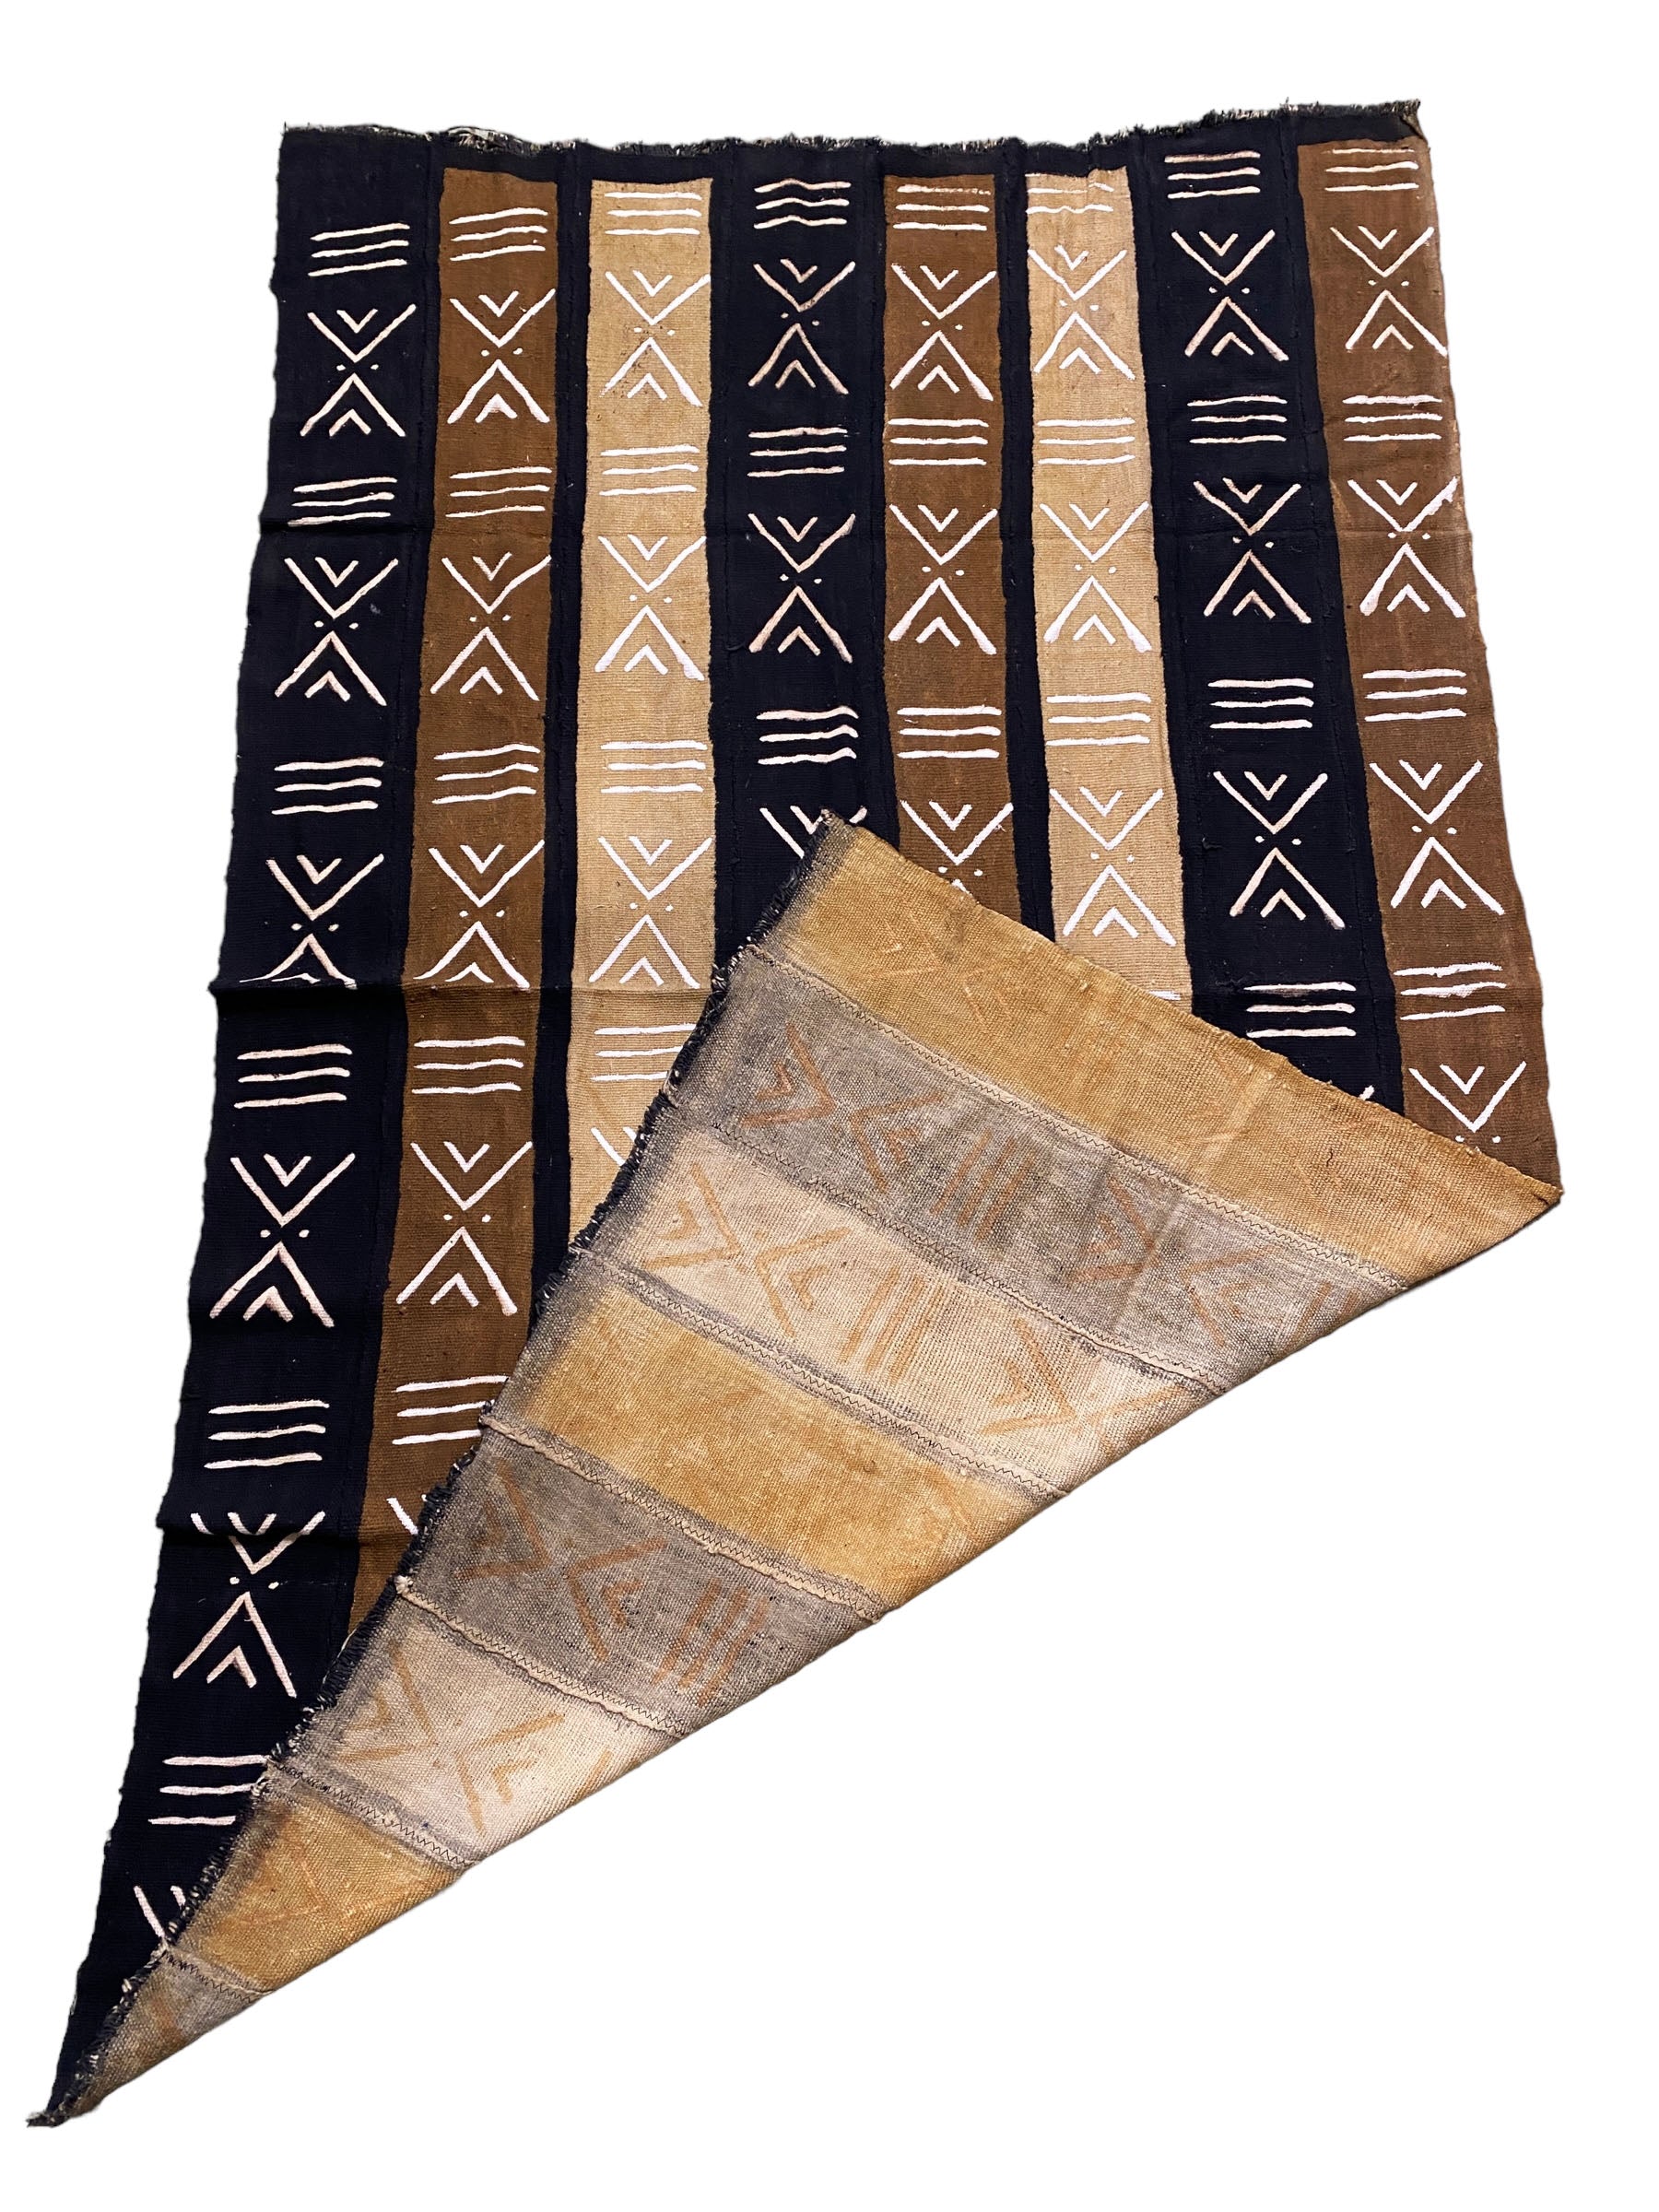 Powerhouse Collection - Bogolanfini or mud cloth from Mali